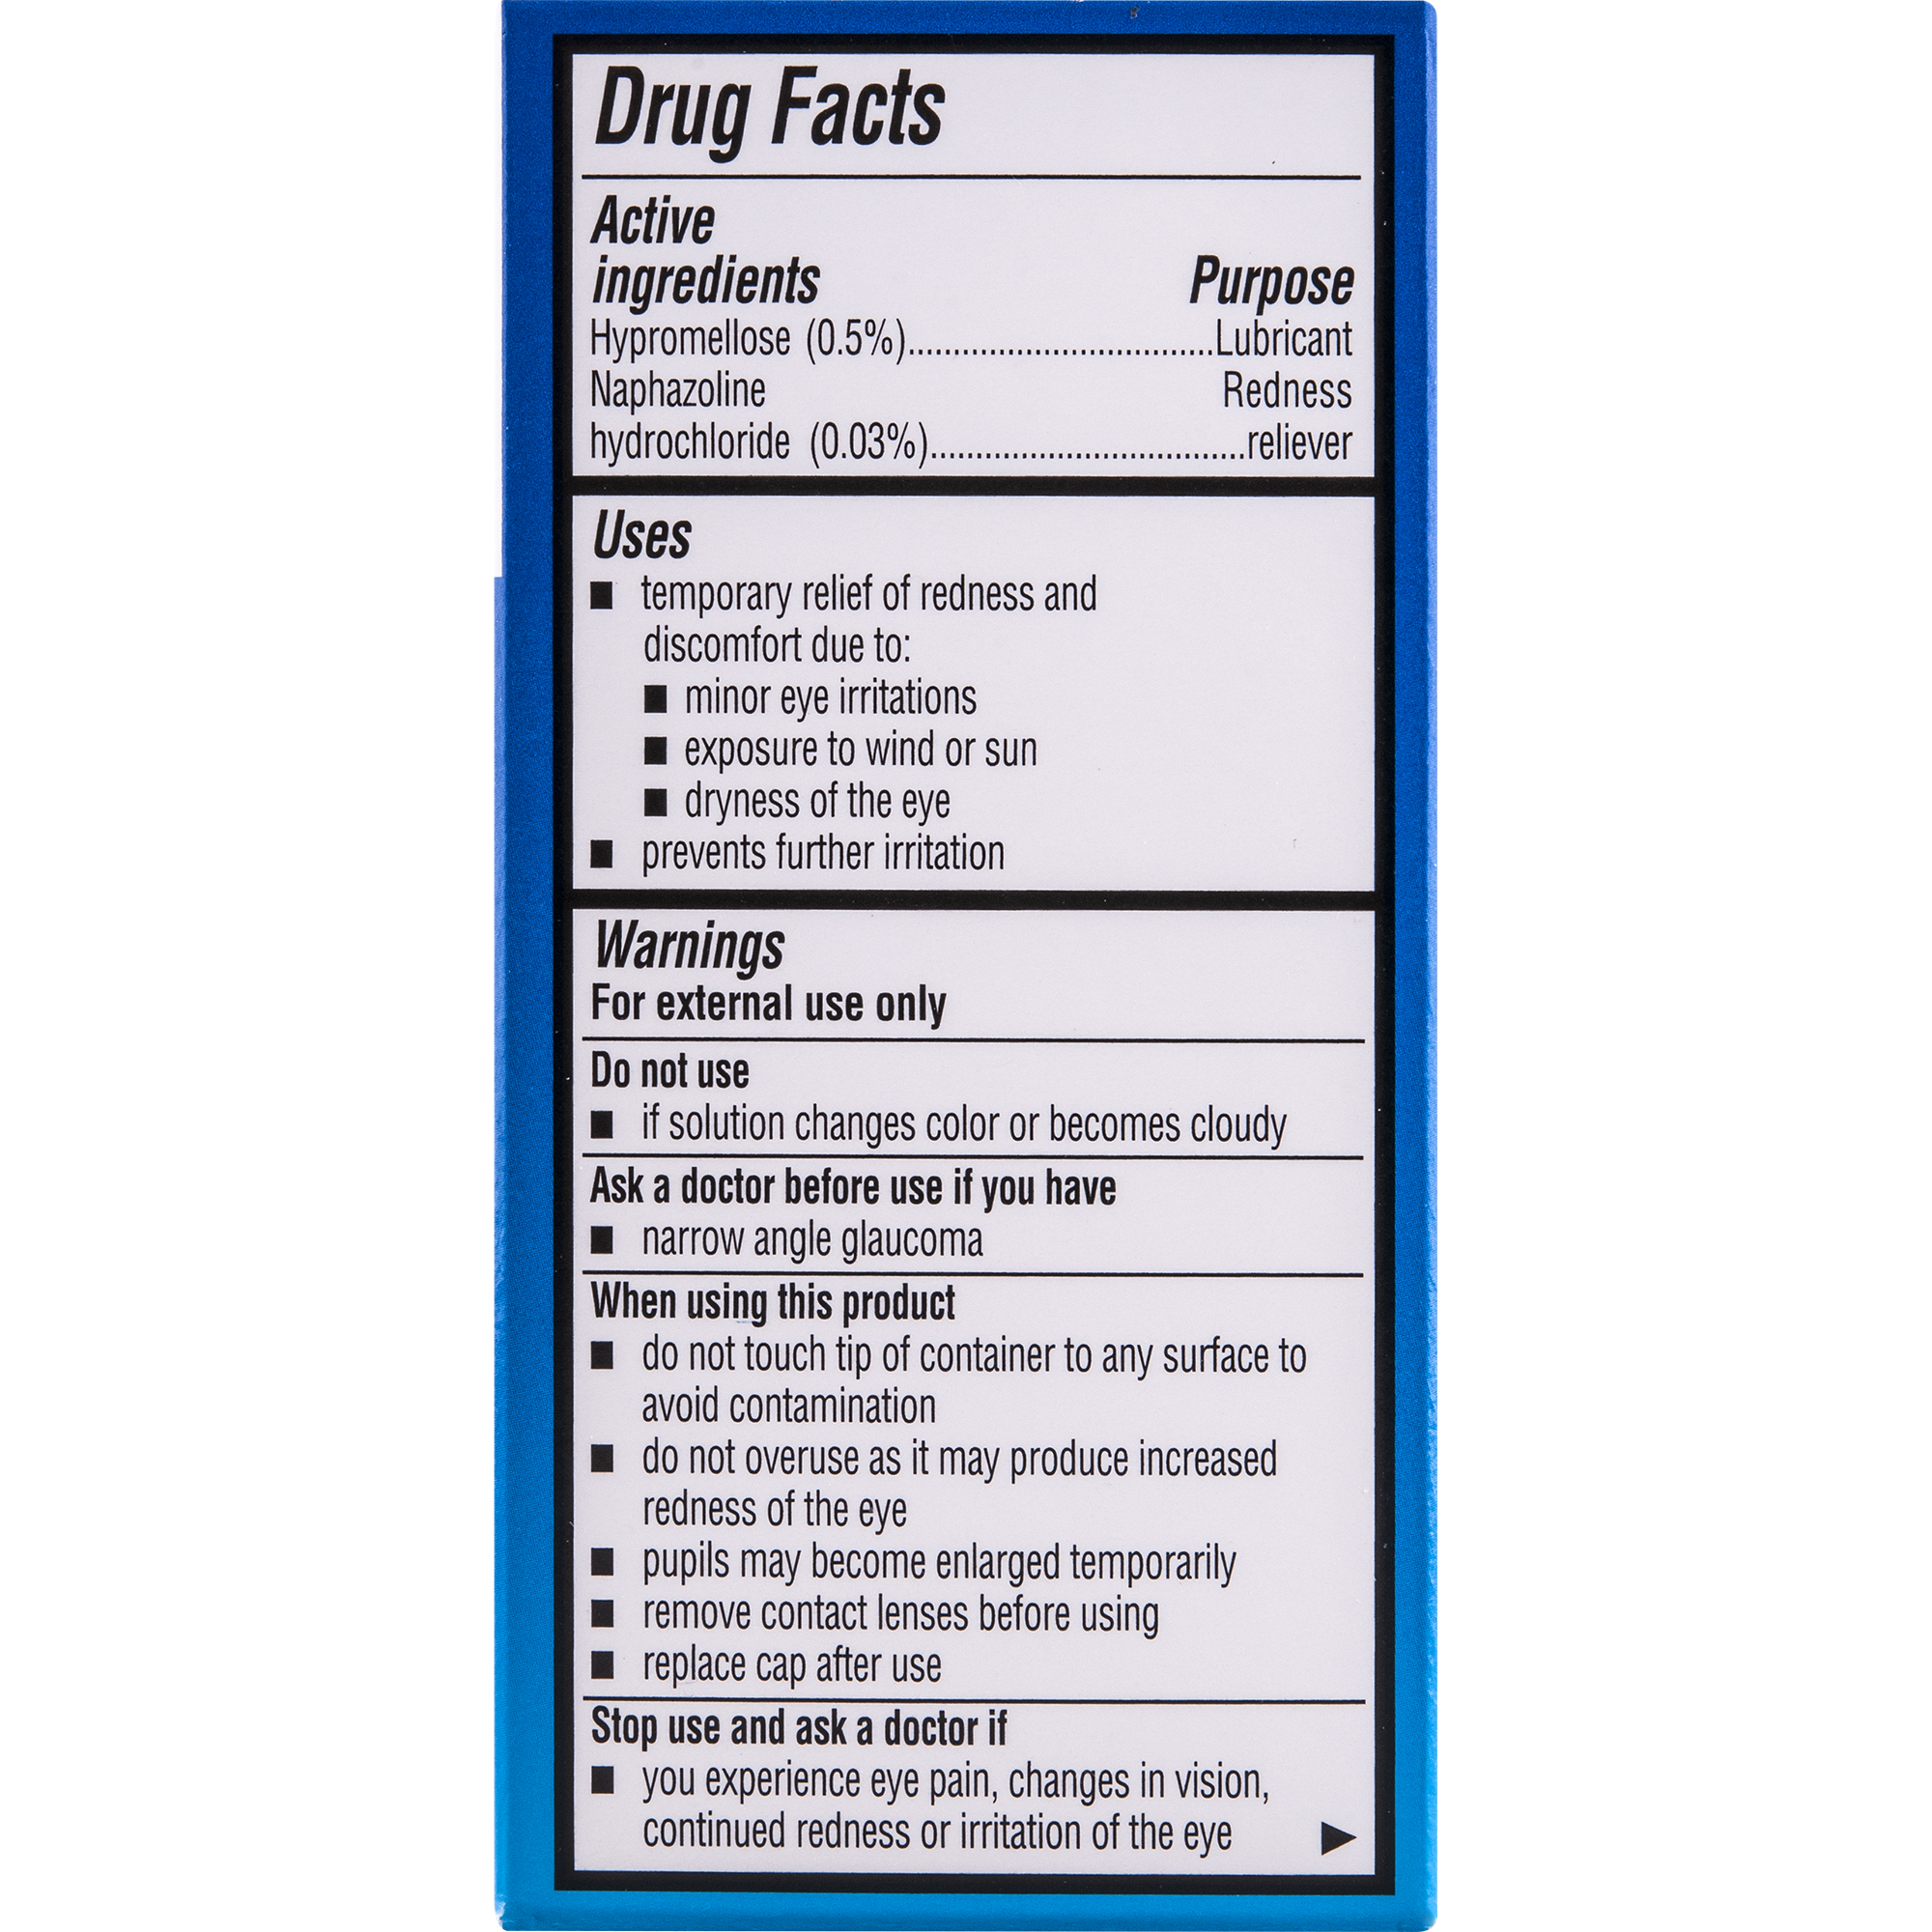 Bausch & Lomb Advanced Eye Relief Maximum Relief Lubricant/Redness Reliever Eye Drops, .5 oz - image 2 of 8